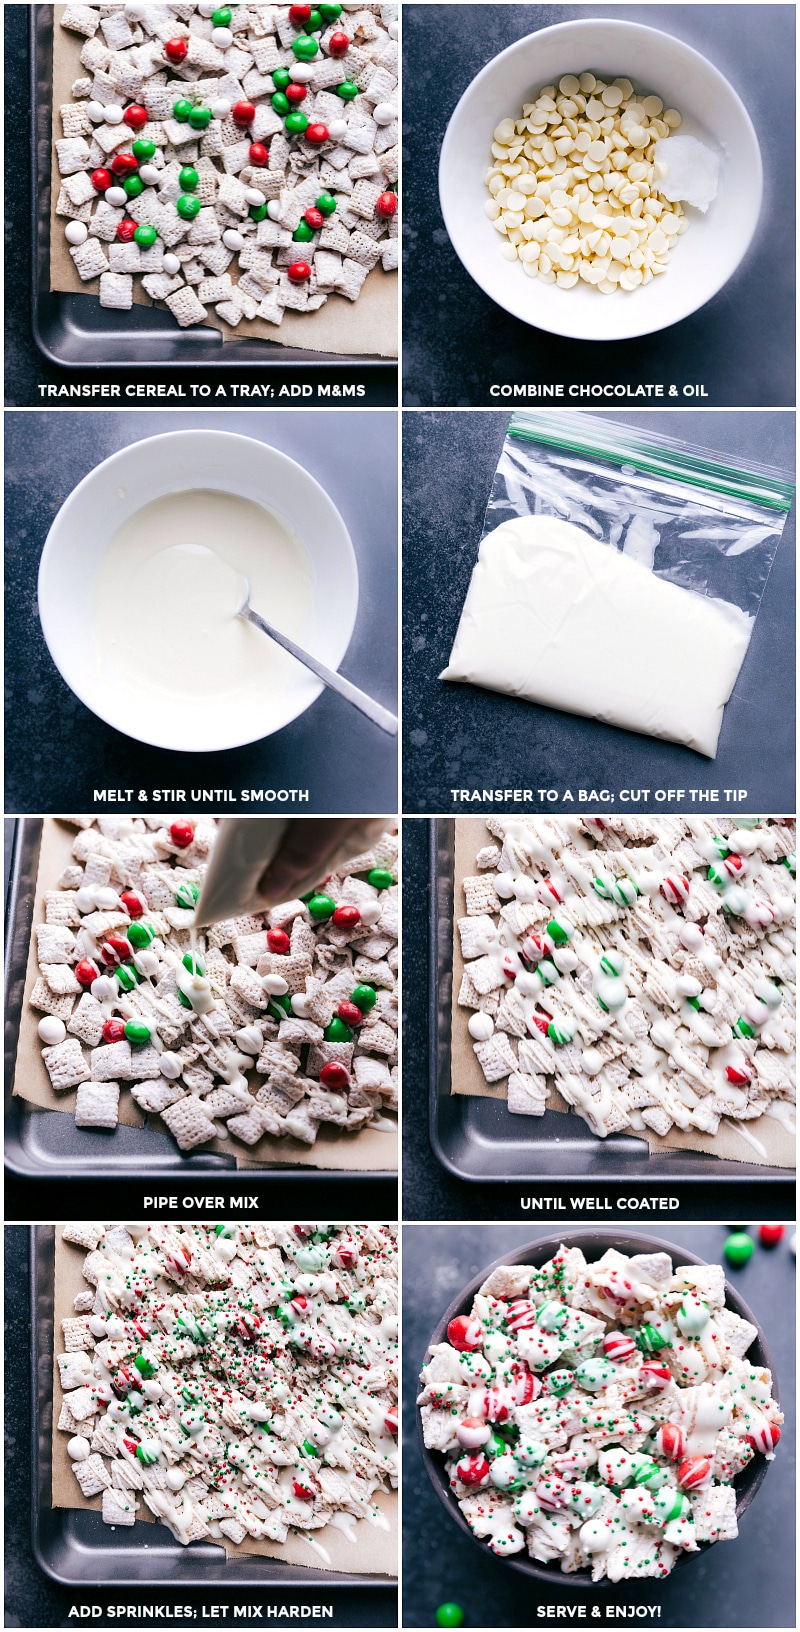 Process shots: Transfer cereal to a try and add candies; combine white chocolate and oil; heat and stir to melt; transfer to a bag; pipe chocolate over snack mix; add sprinkles and let harden; serve.